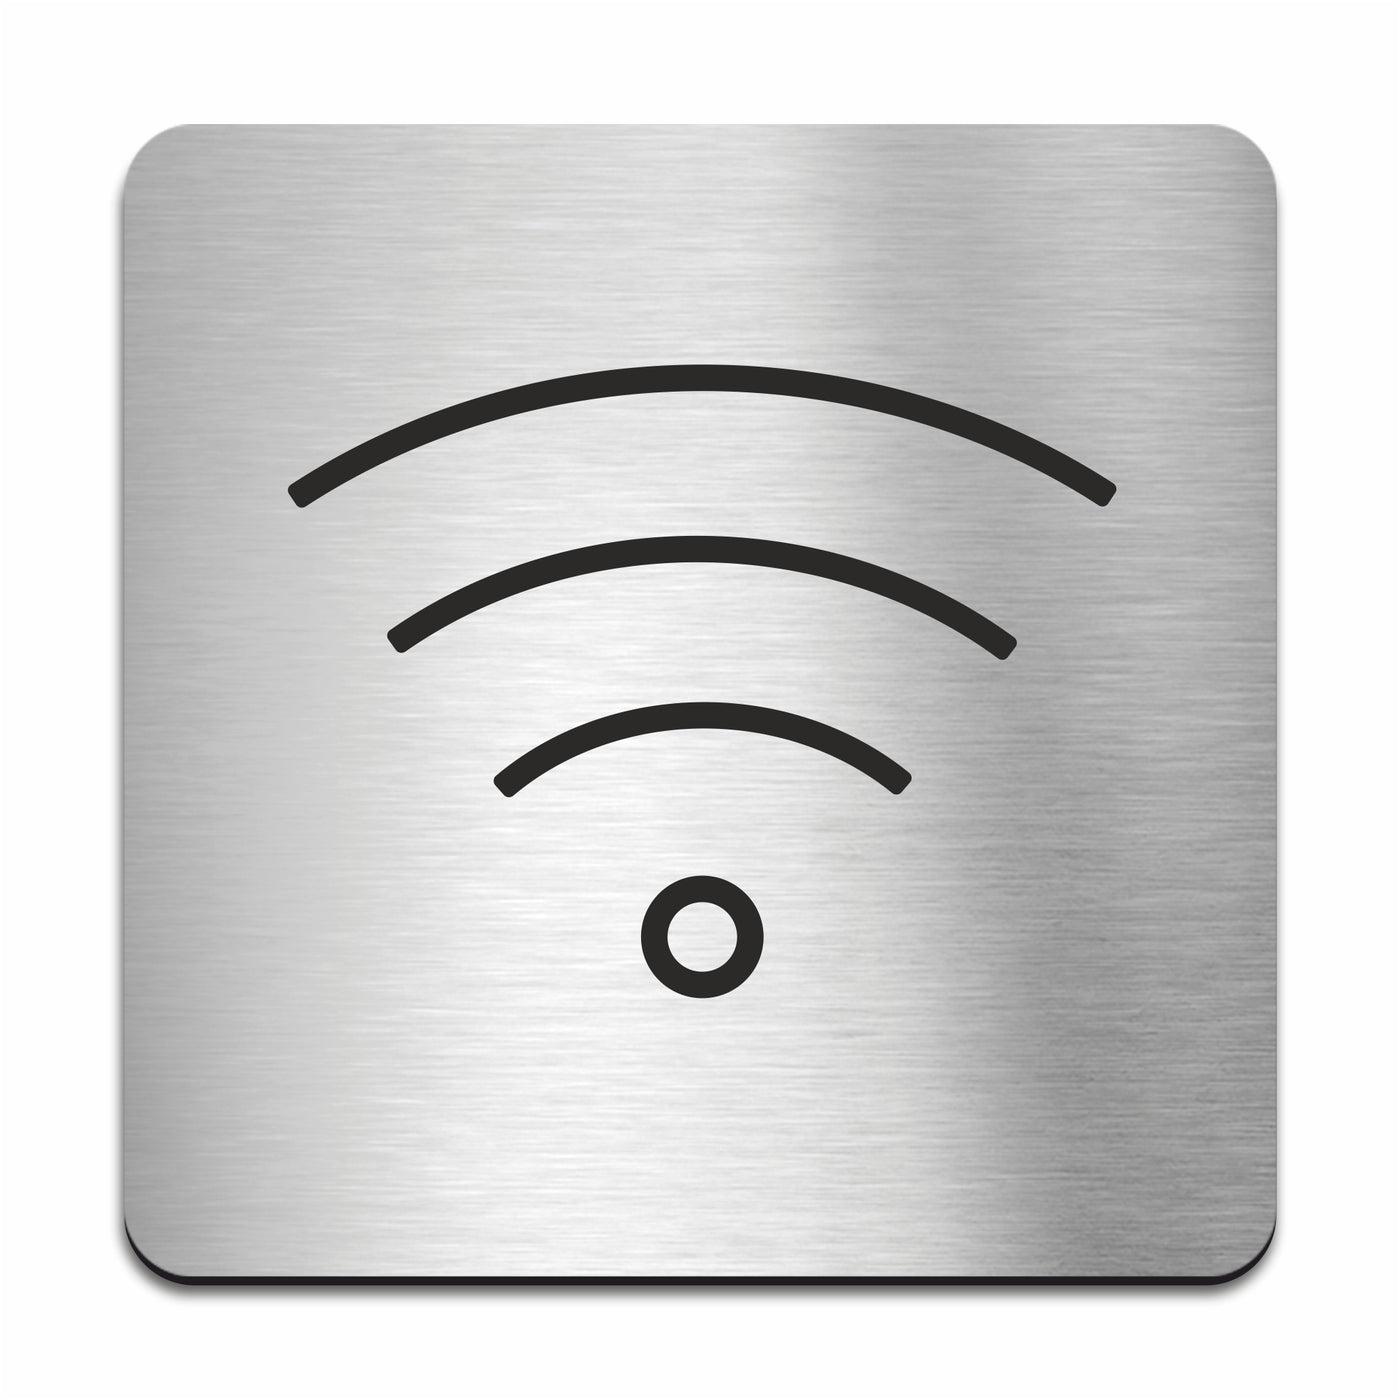 Wi-Fi Sign - Stainless steel